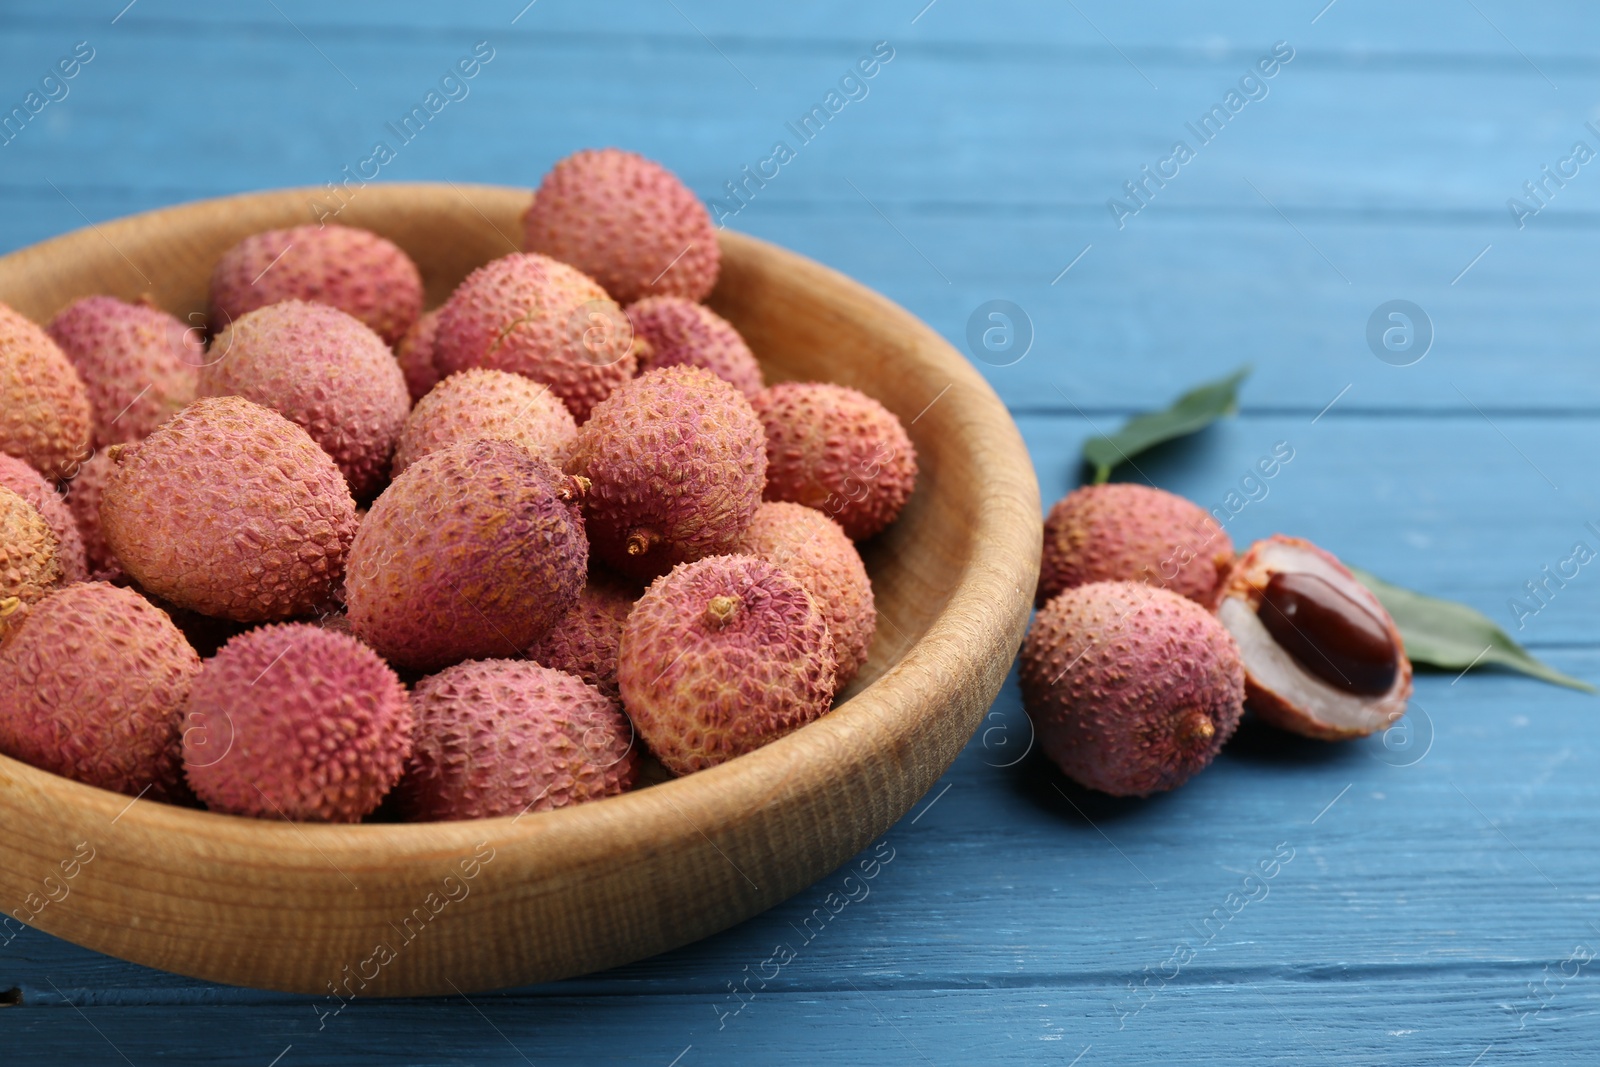 Photo of Fresh ripe lychee fruits on blue wooden table